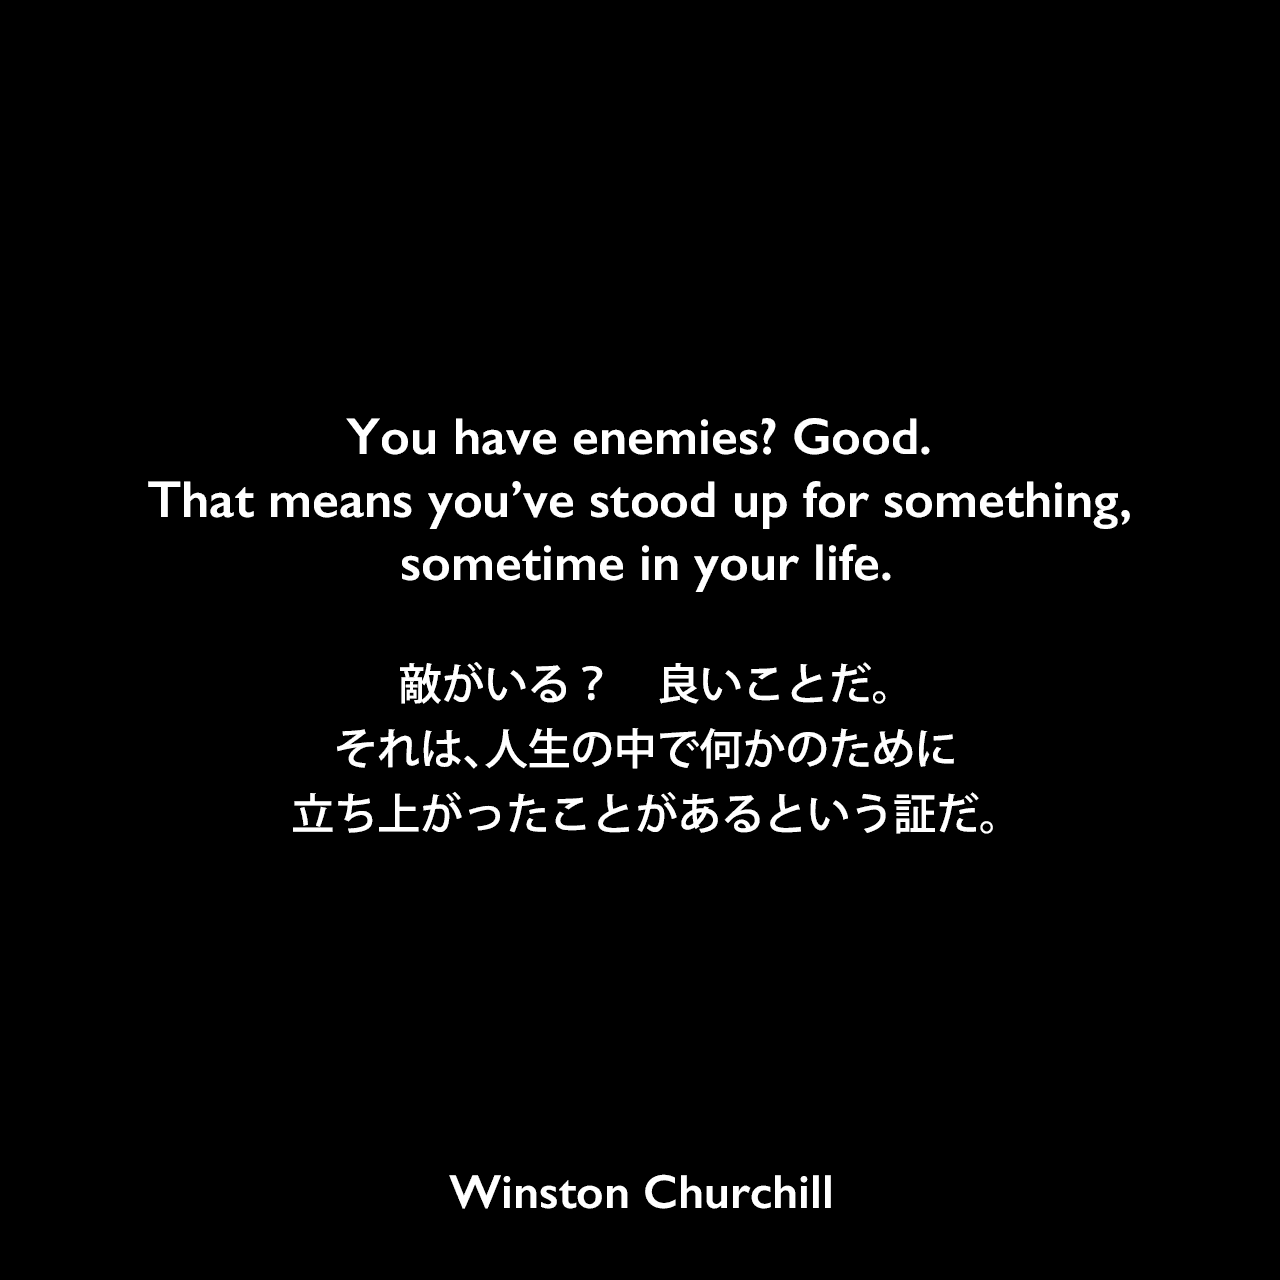 You have enemies? Good. That means you’ve stood up for something, sometime in your life.敵がいる？ 良いことだ。それは、人生の中で何かのために立ち上がったことがあるという証だ。